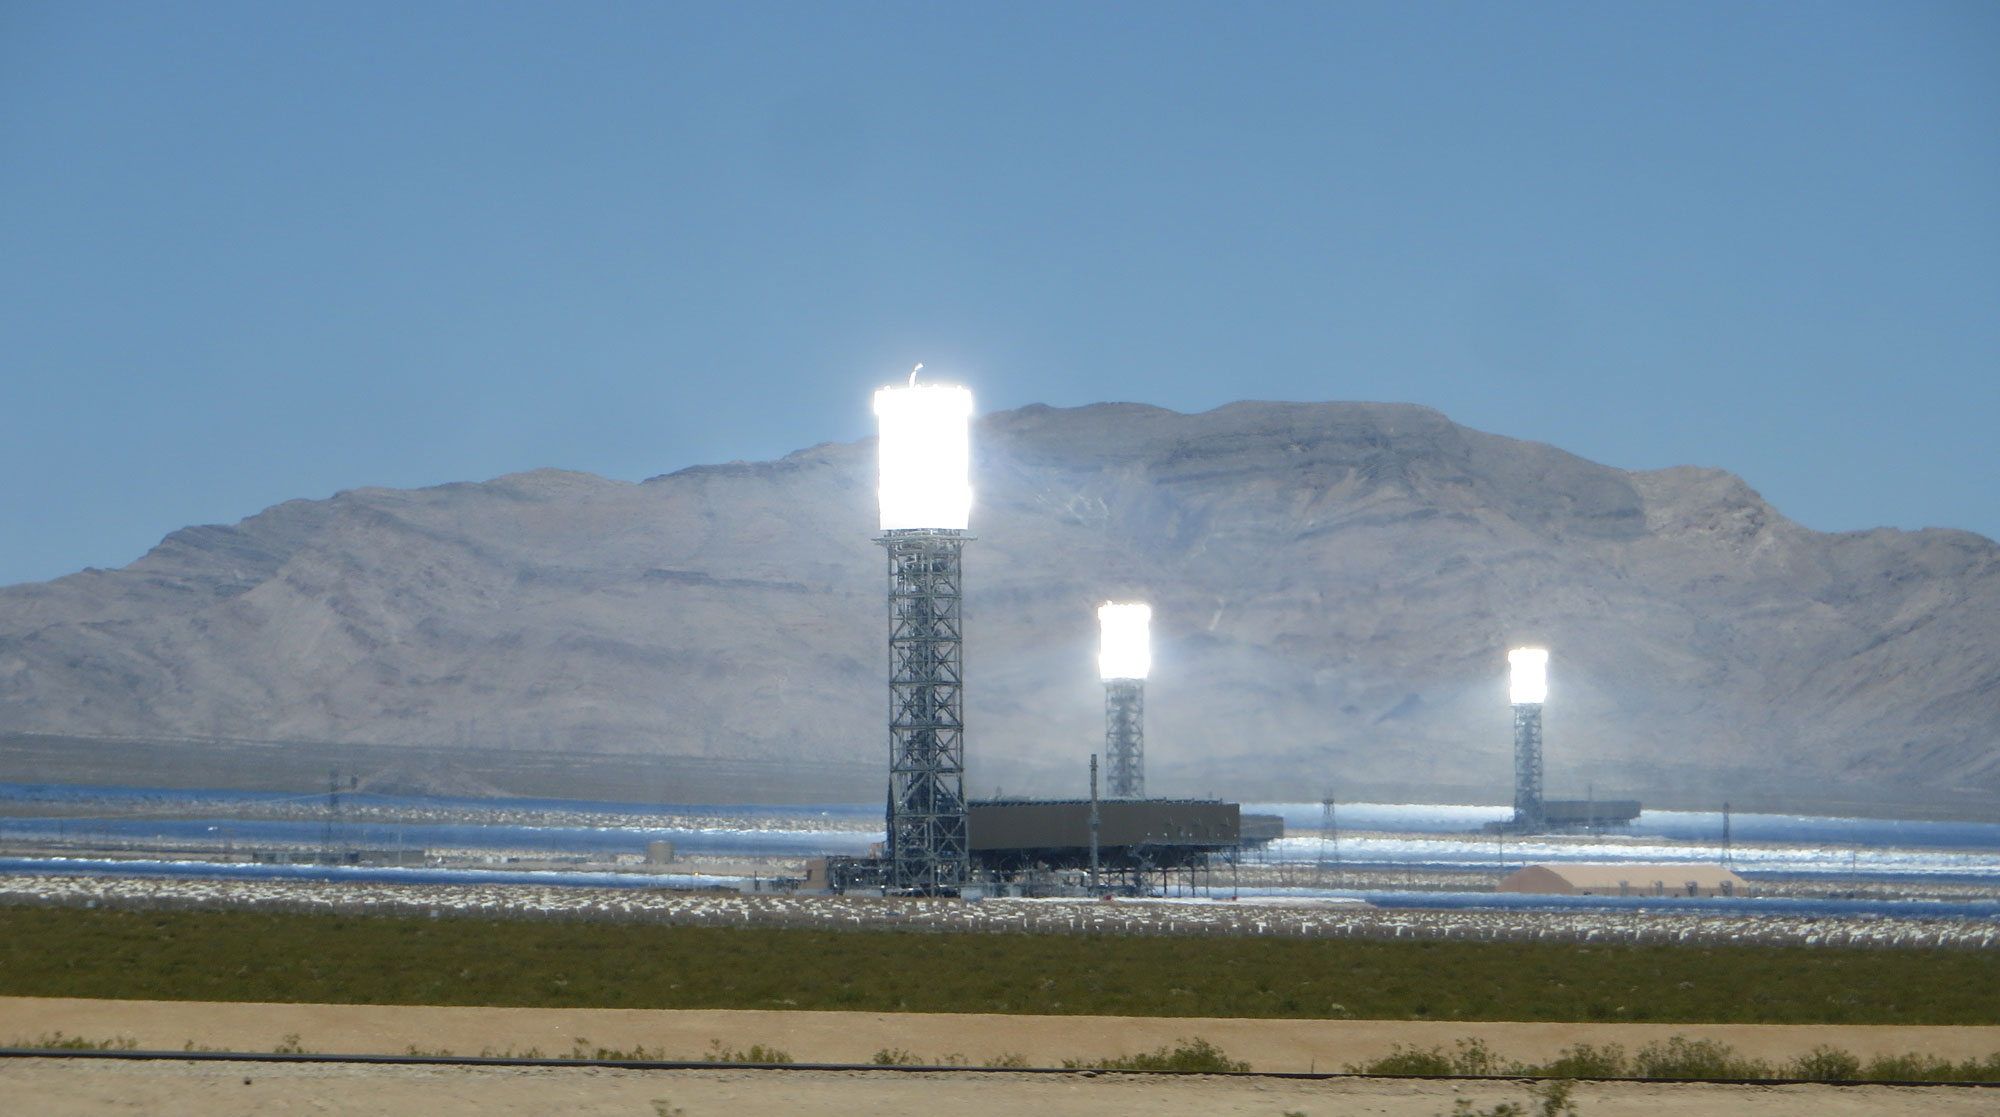 Ground-level photograph of the Ivanpah Solar Power Plant in California. The photo shows three towers made up of metal scaffolding, each with a cylindrical light at the top. On the ground, mirrors can be seen surrounding the towers. A mountain rises in the background.